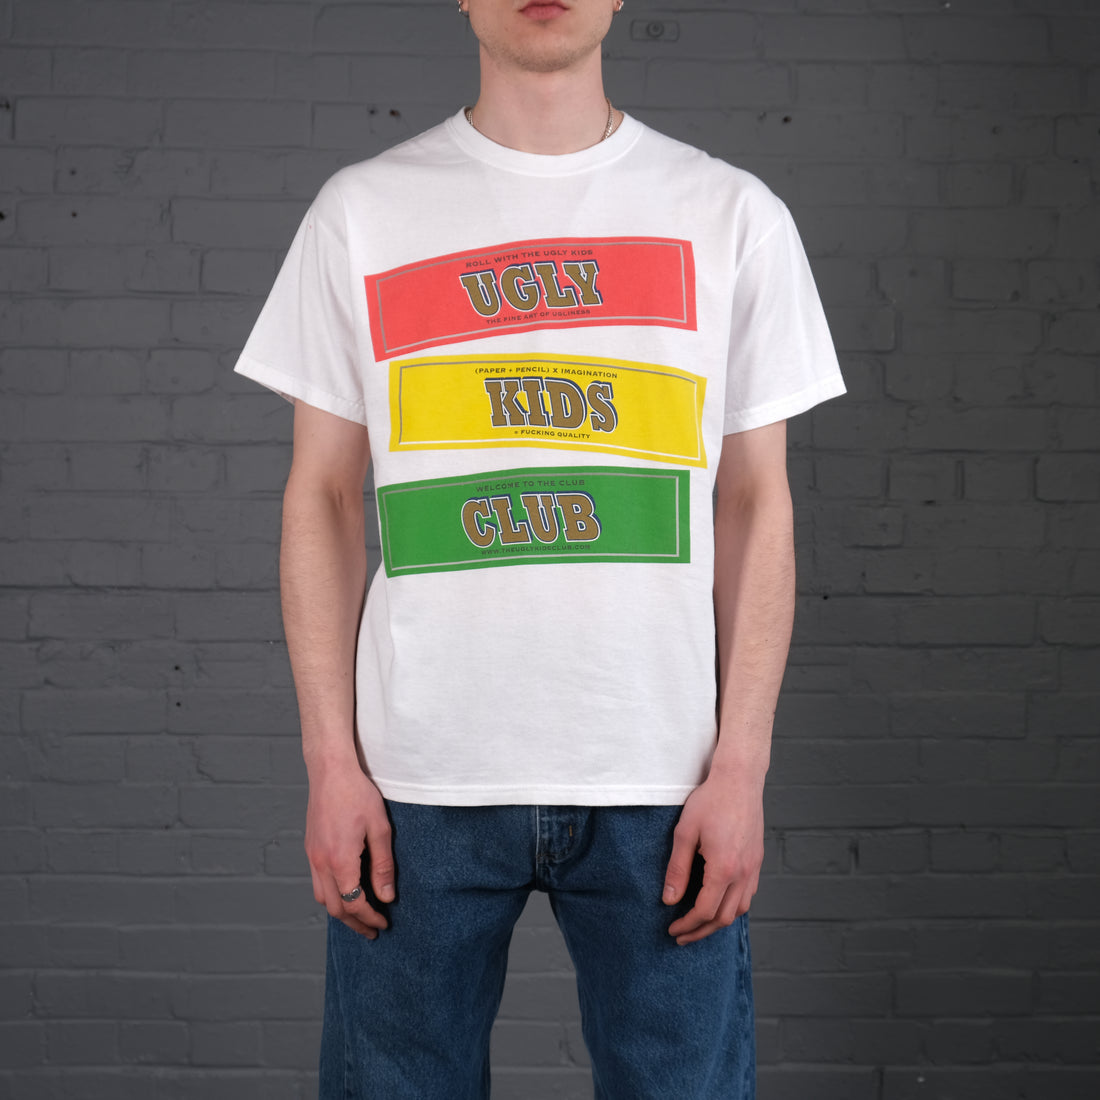 Vintage Rizla Ugly Kids Club graphic t-shirt in white